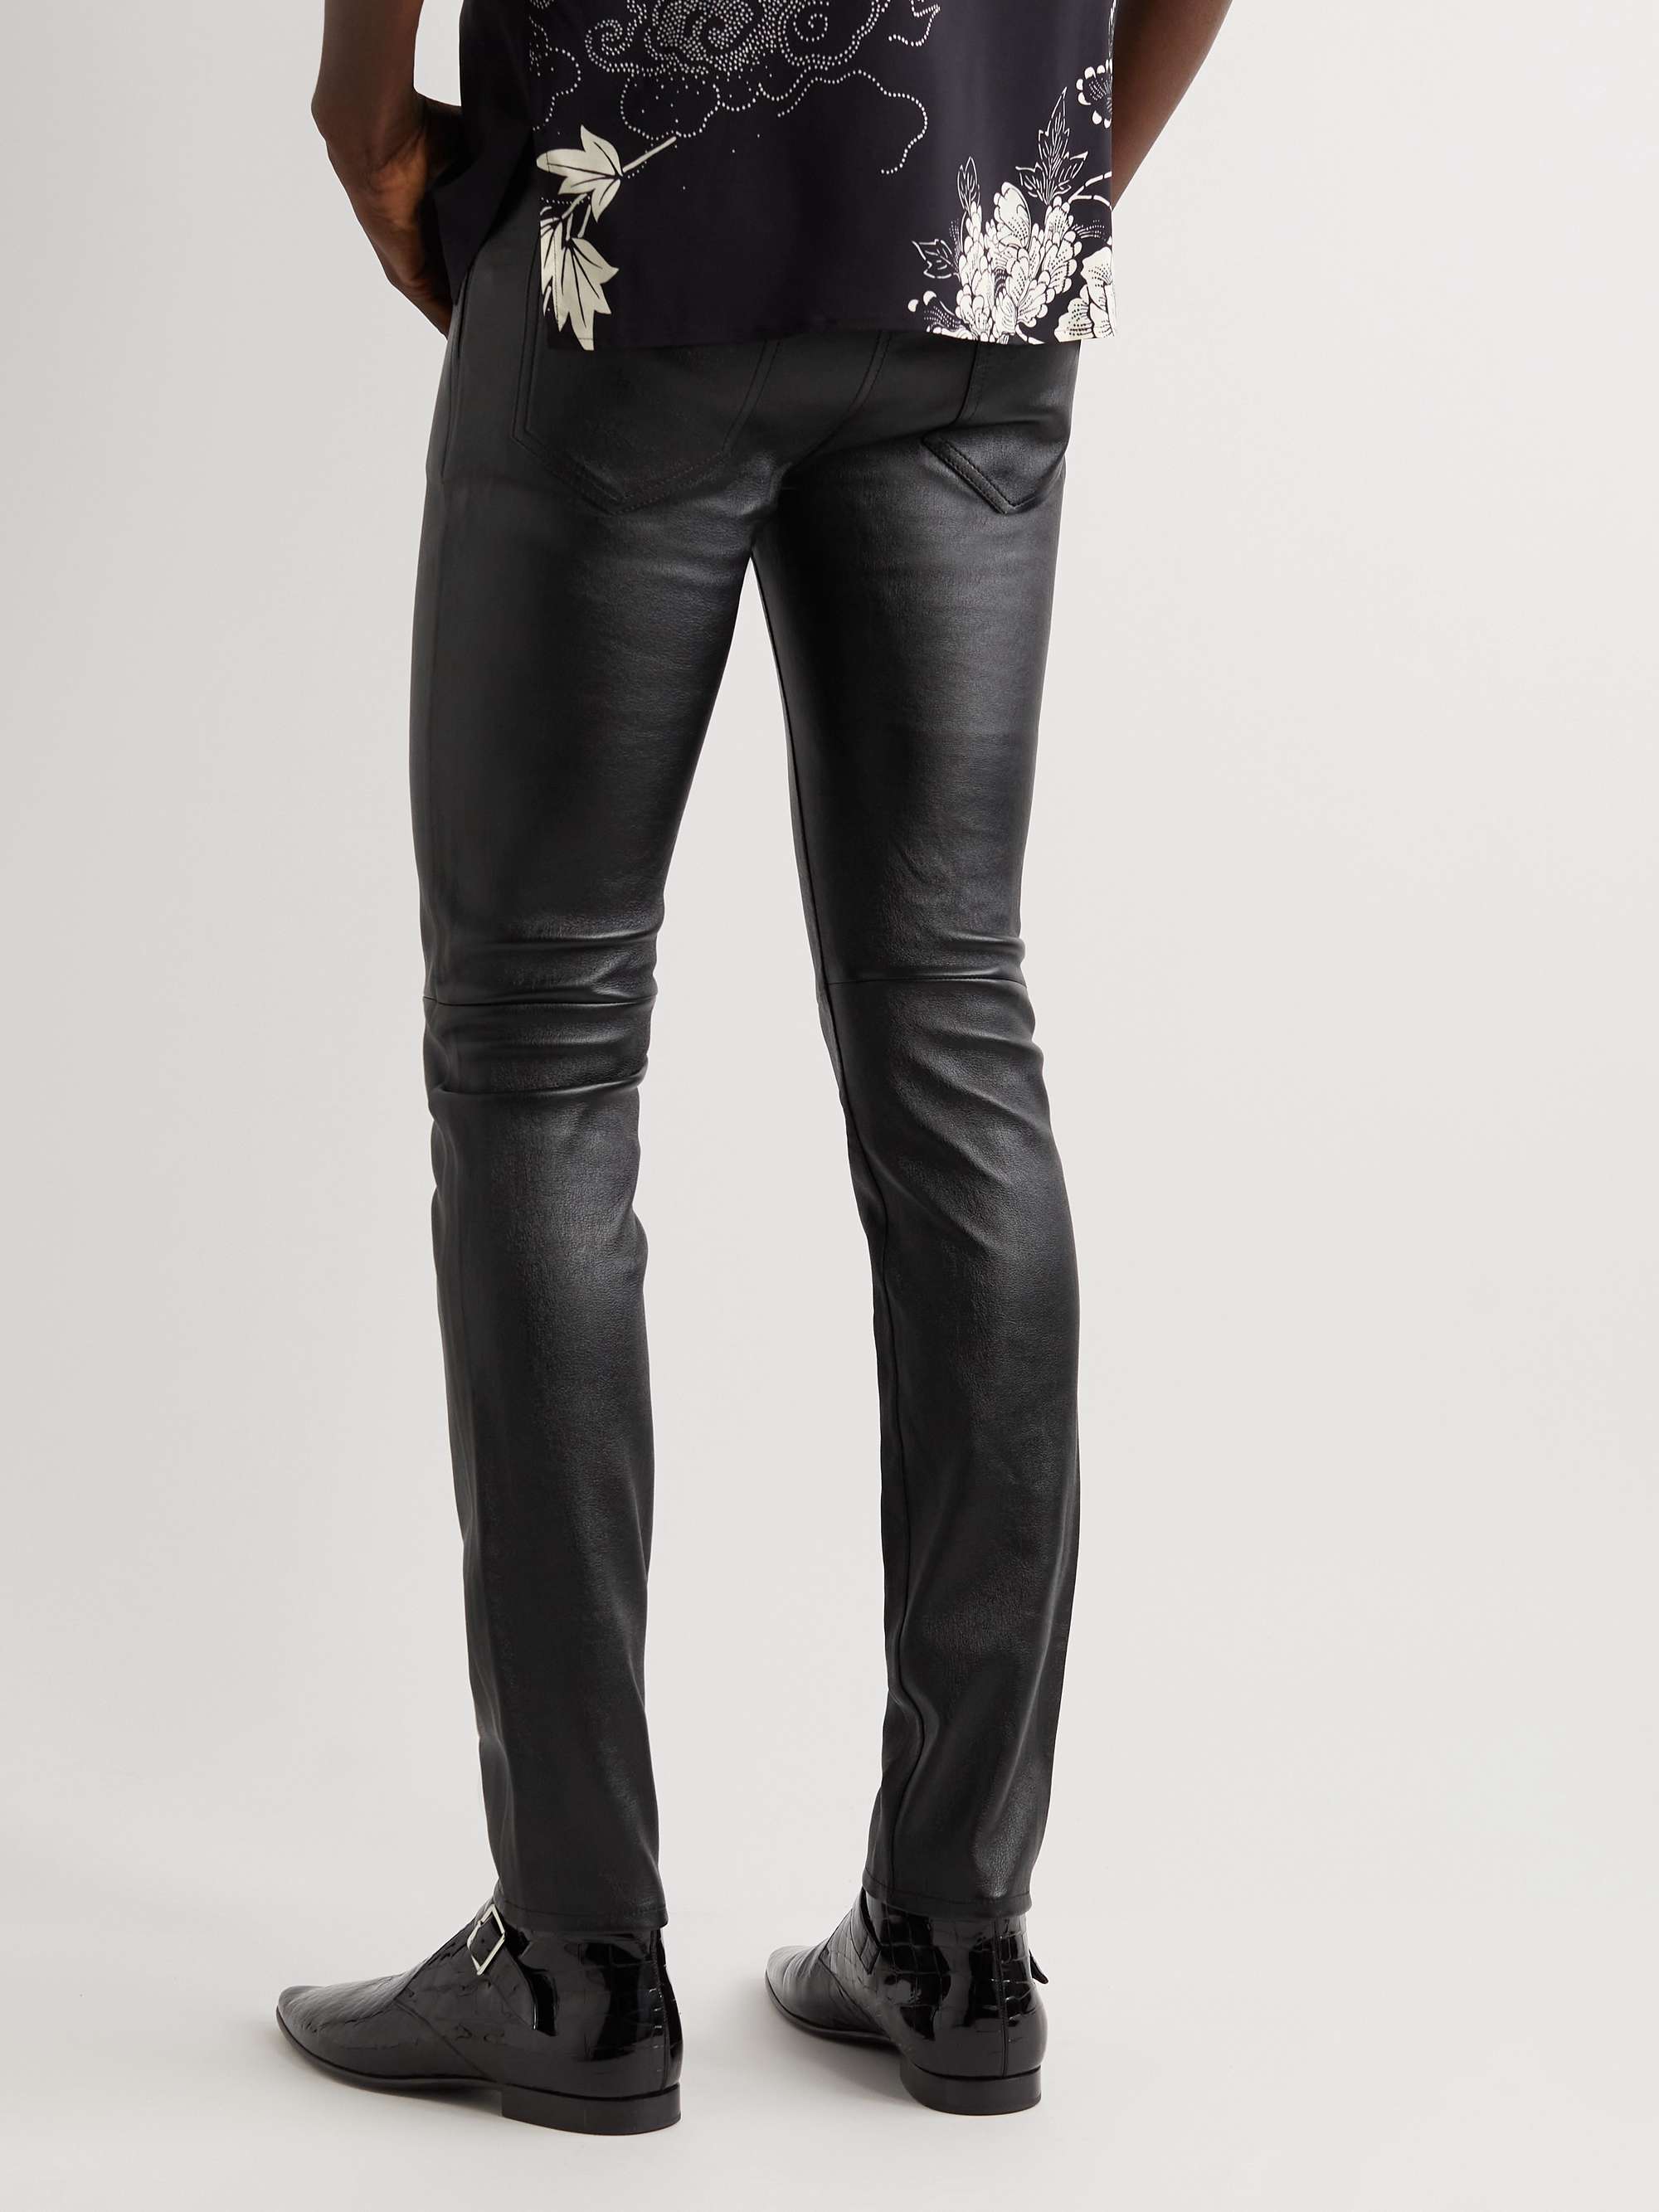 Topshop Leather Trousers outlet  1800 products on sale  FASHIOLAcouk